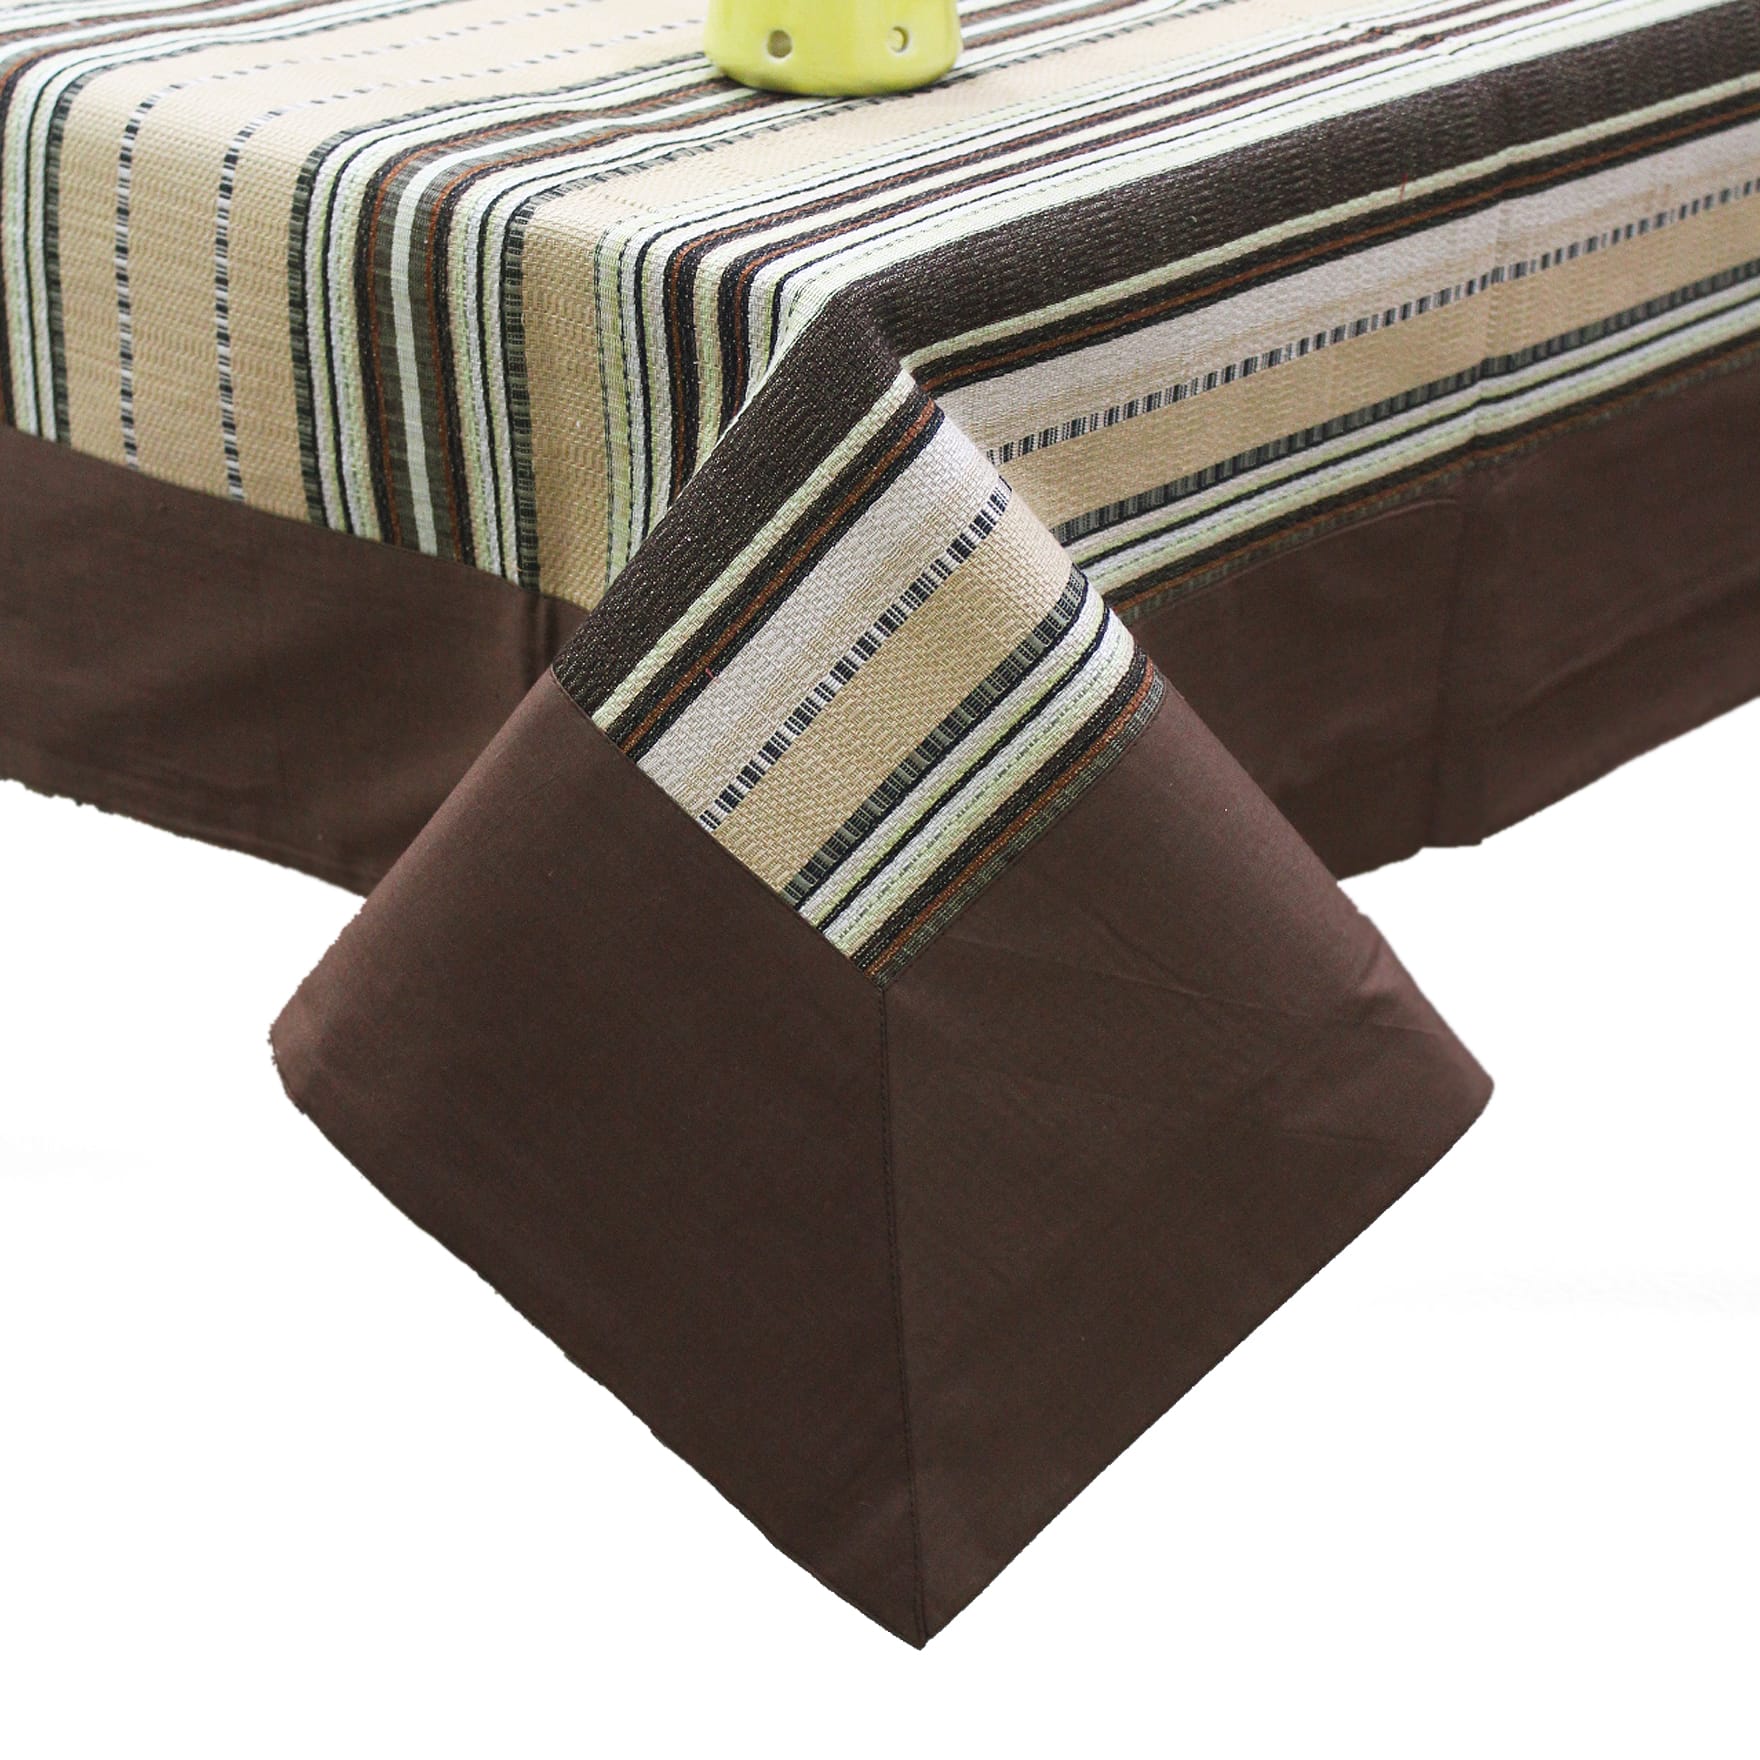 Alpha Coffee Woven Cotton Stripes Table Cover (1 Pc) online in India